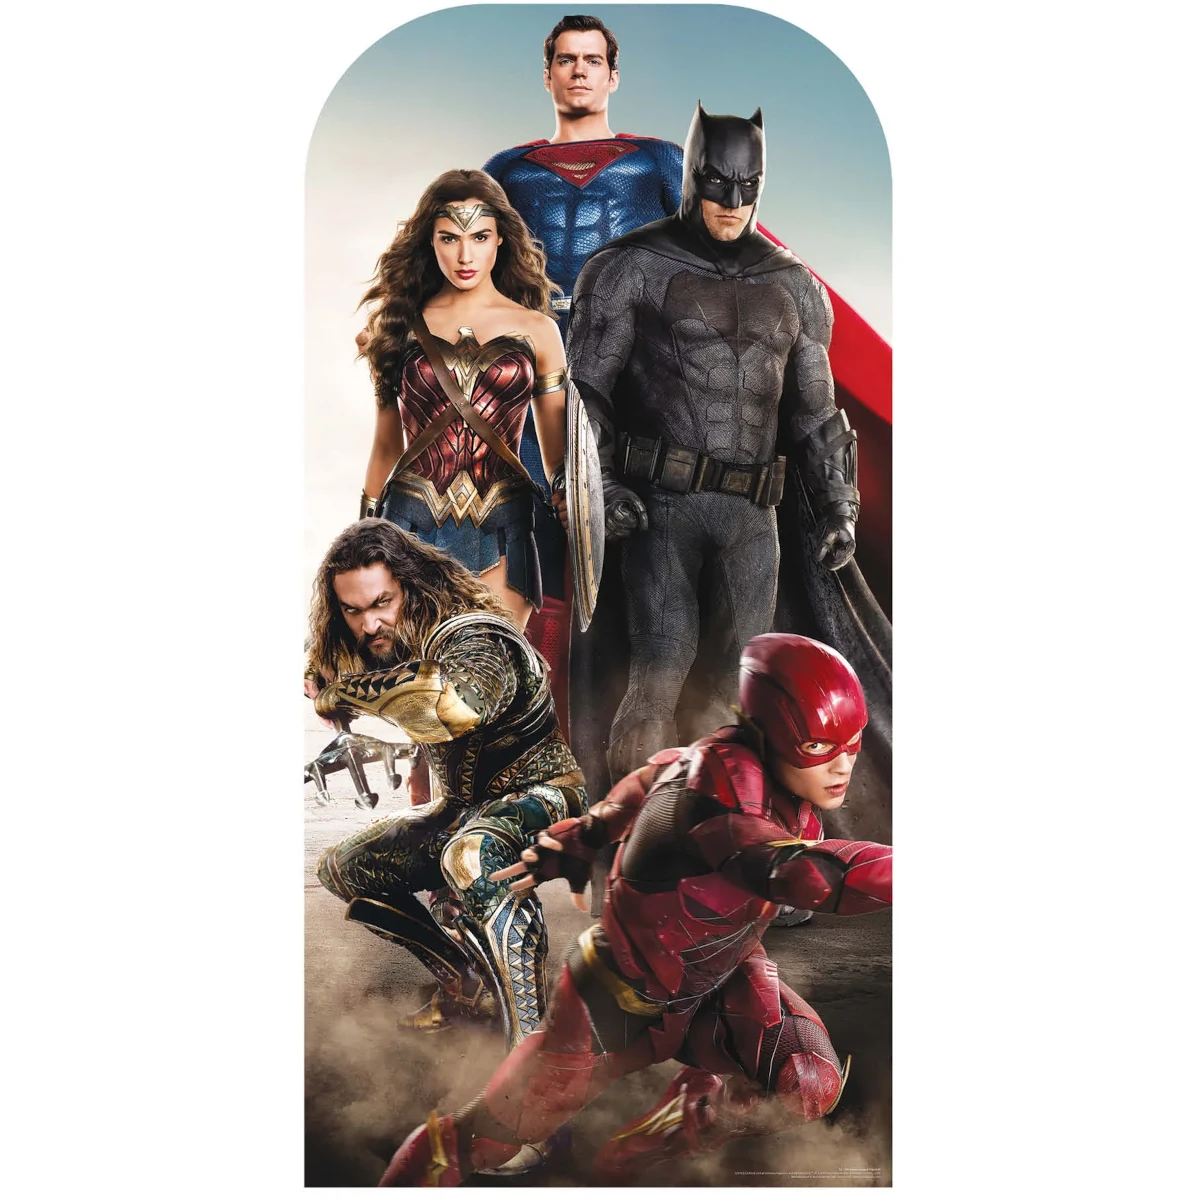 SC1339 Justice League 'Live Action' Official Lifesize Stand-In Cardboard Cutout